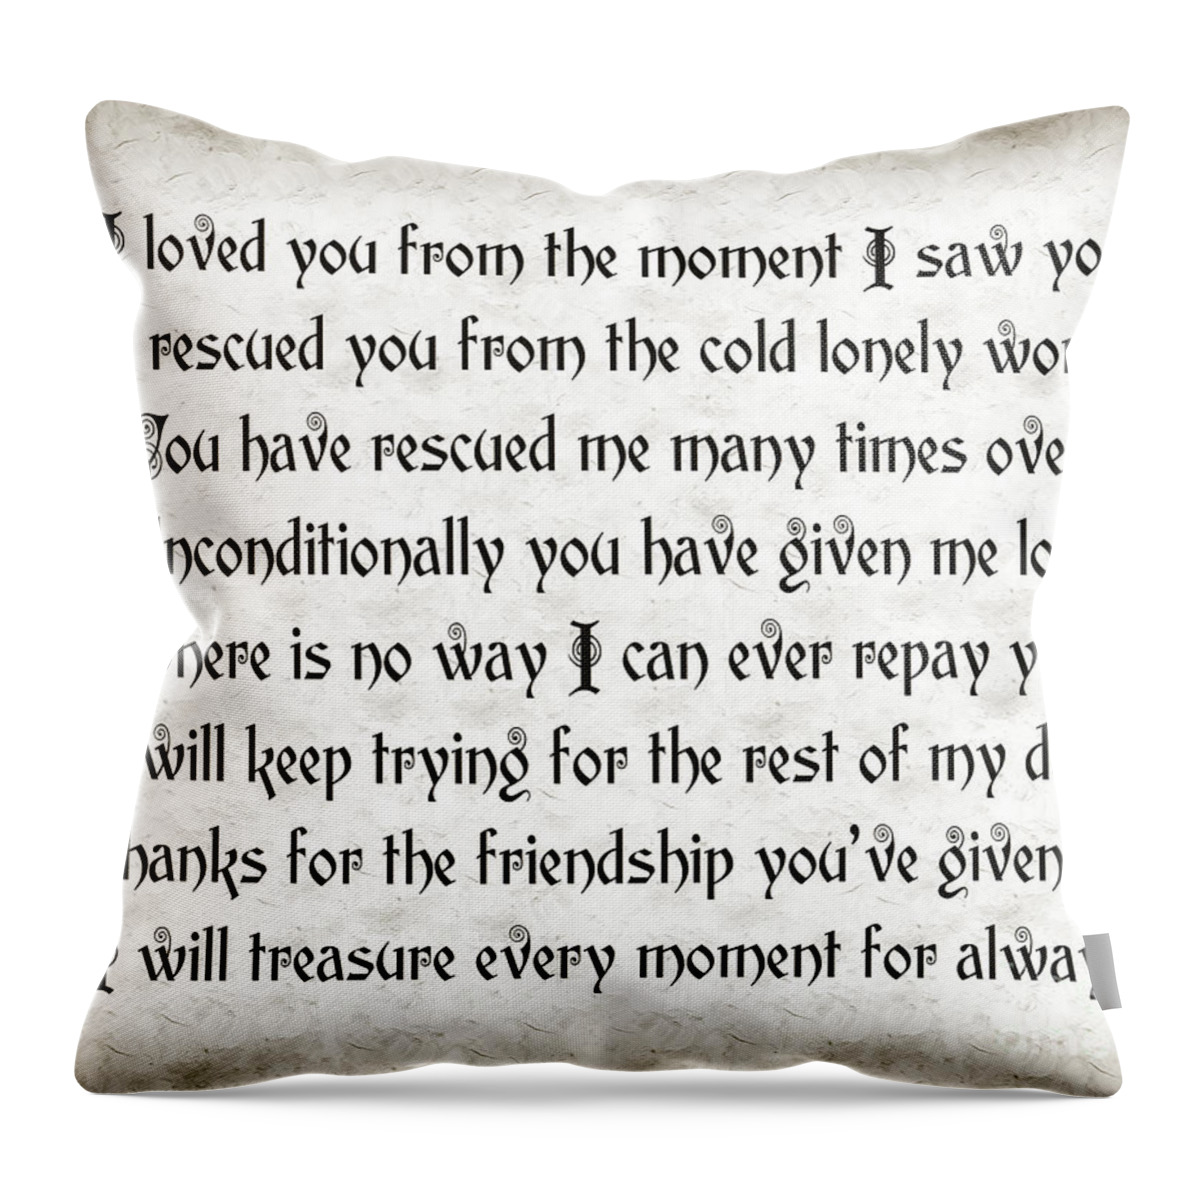 Animal-rescue Throw Pillow featuring the digital art Rescue Love by Andee Design